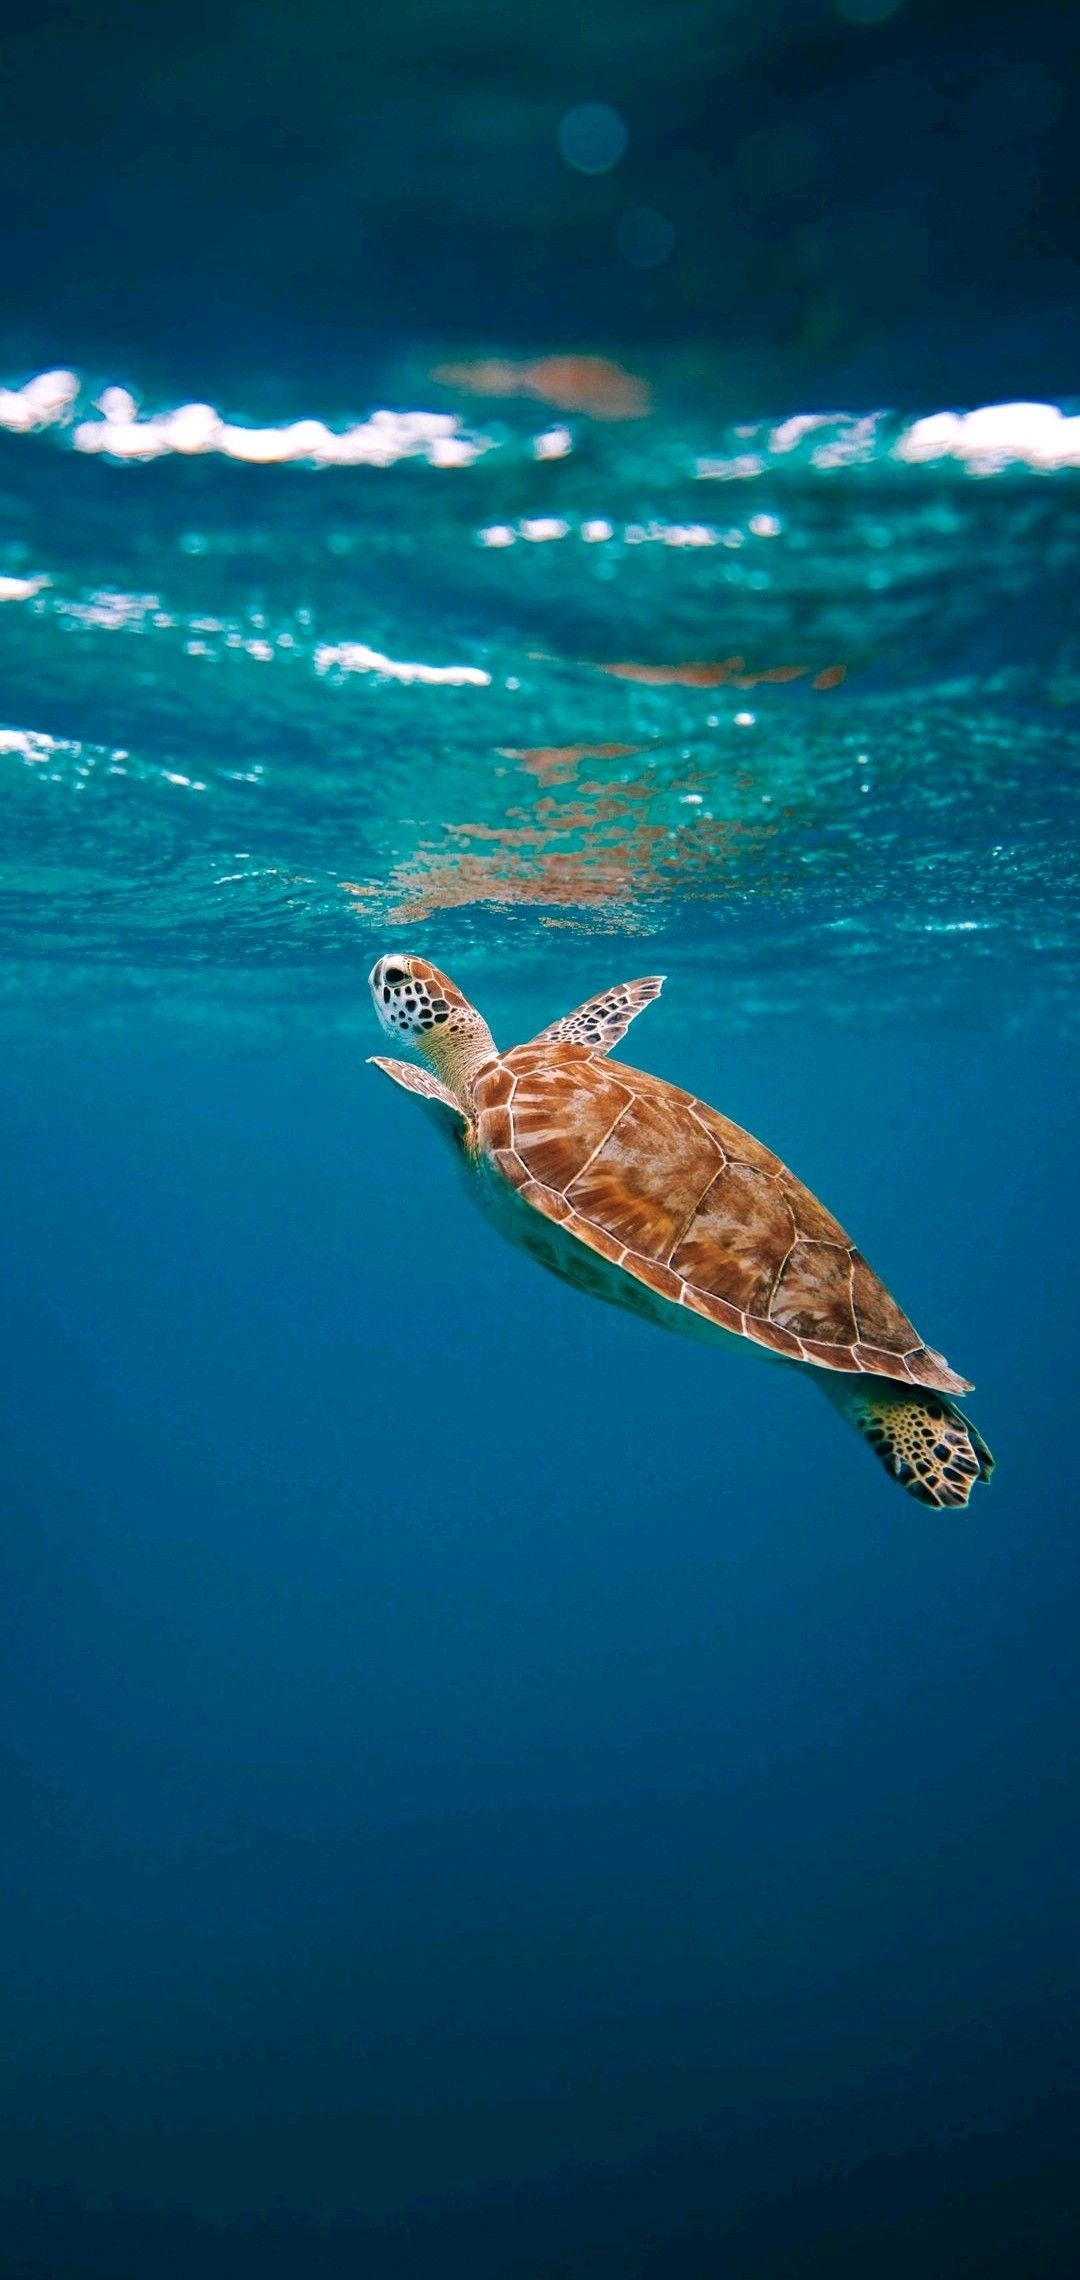 Turtle-inspired wallpapers, Captivating sea turtles, Stunning underwater world, Exquisite turtle, 1080x2280 HD Phone